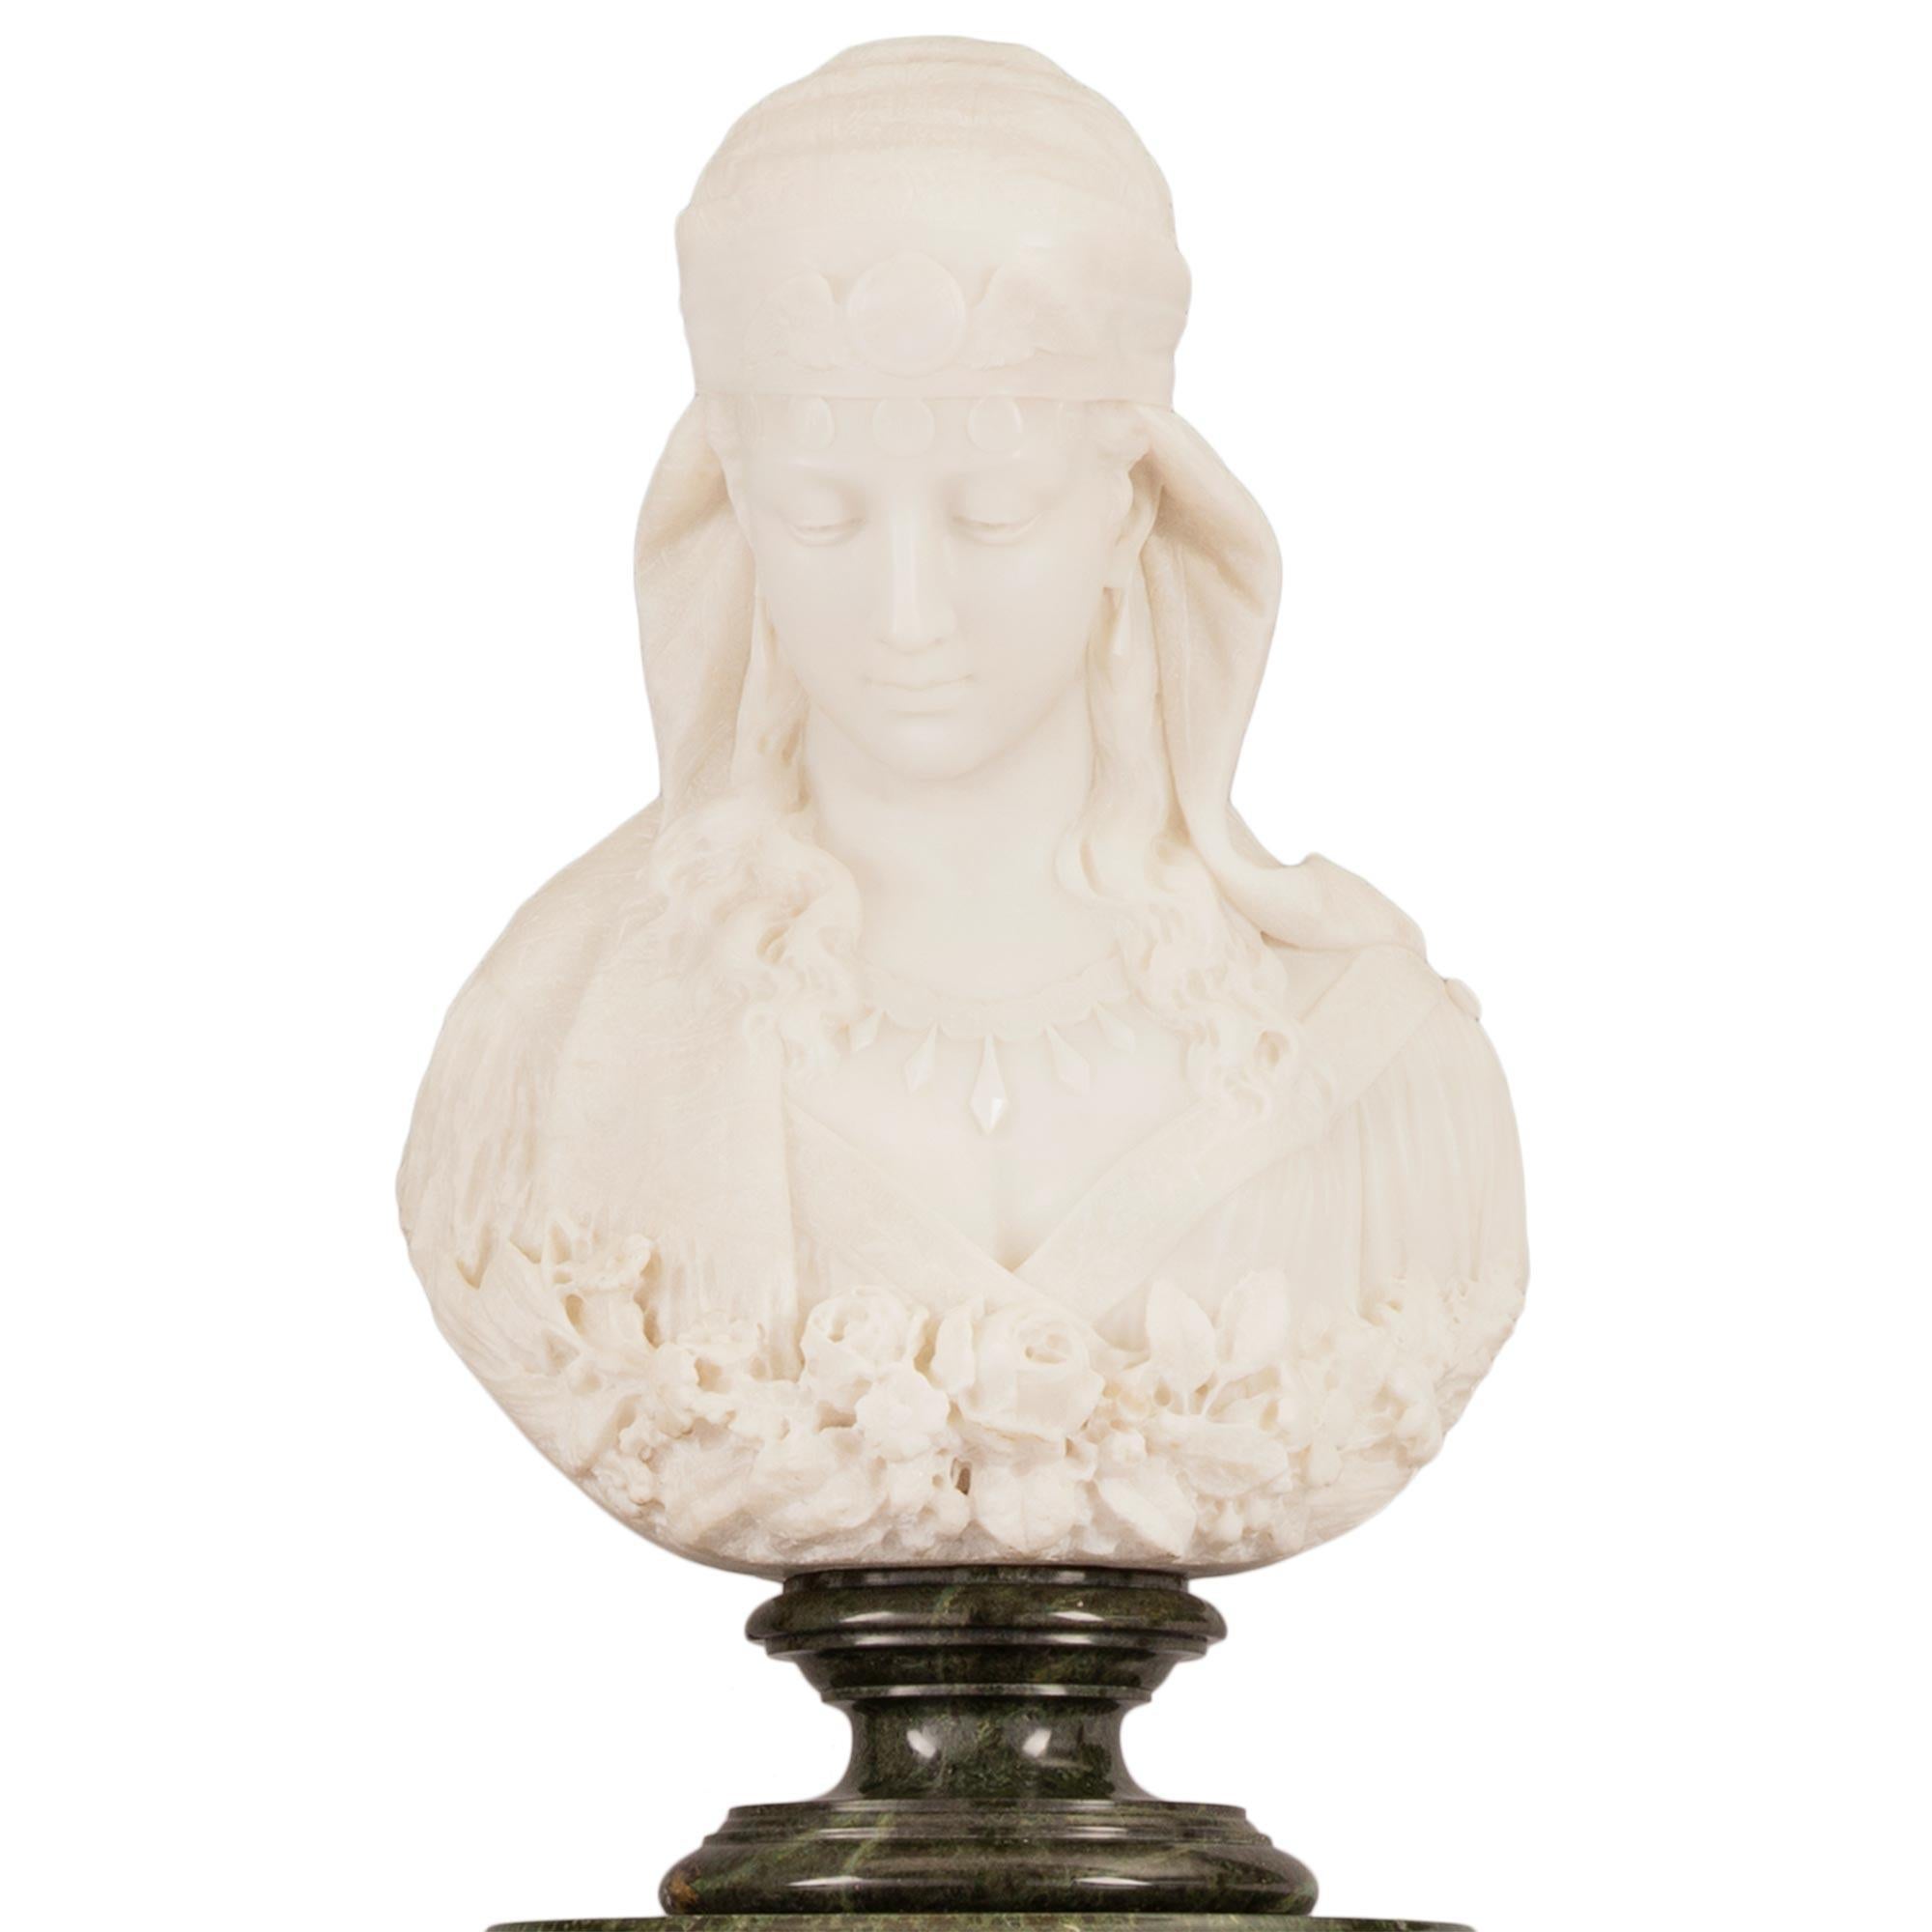 Italian 19th Century Neoclassical Style Marble Bust Named La Sulamitide For Sale 4